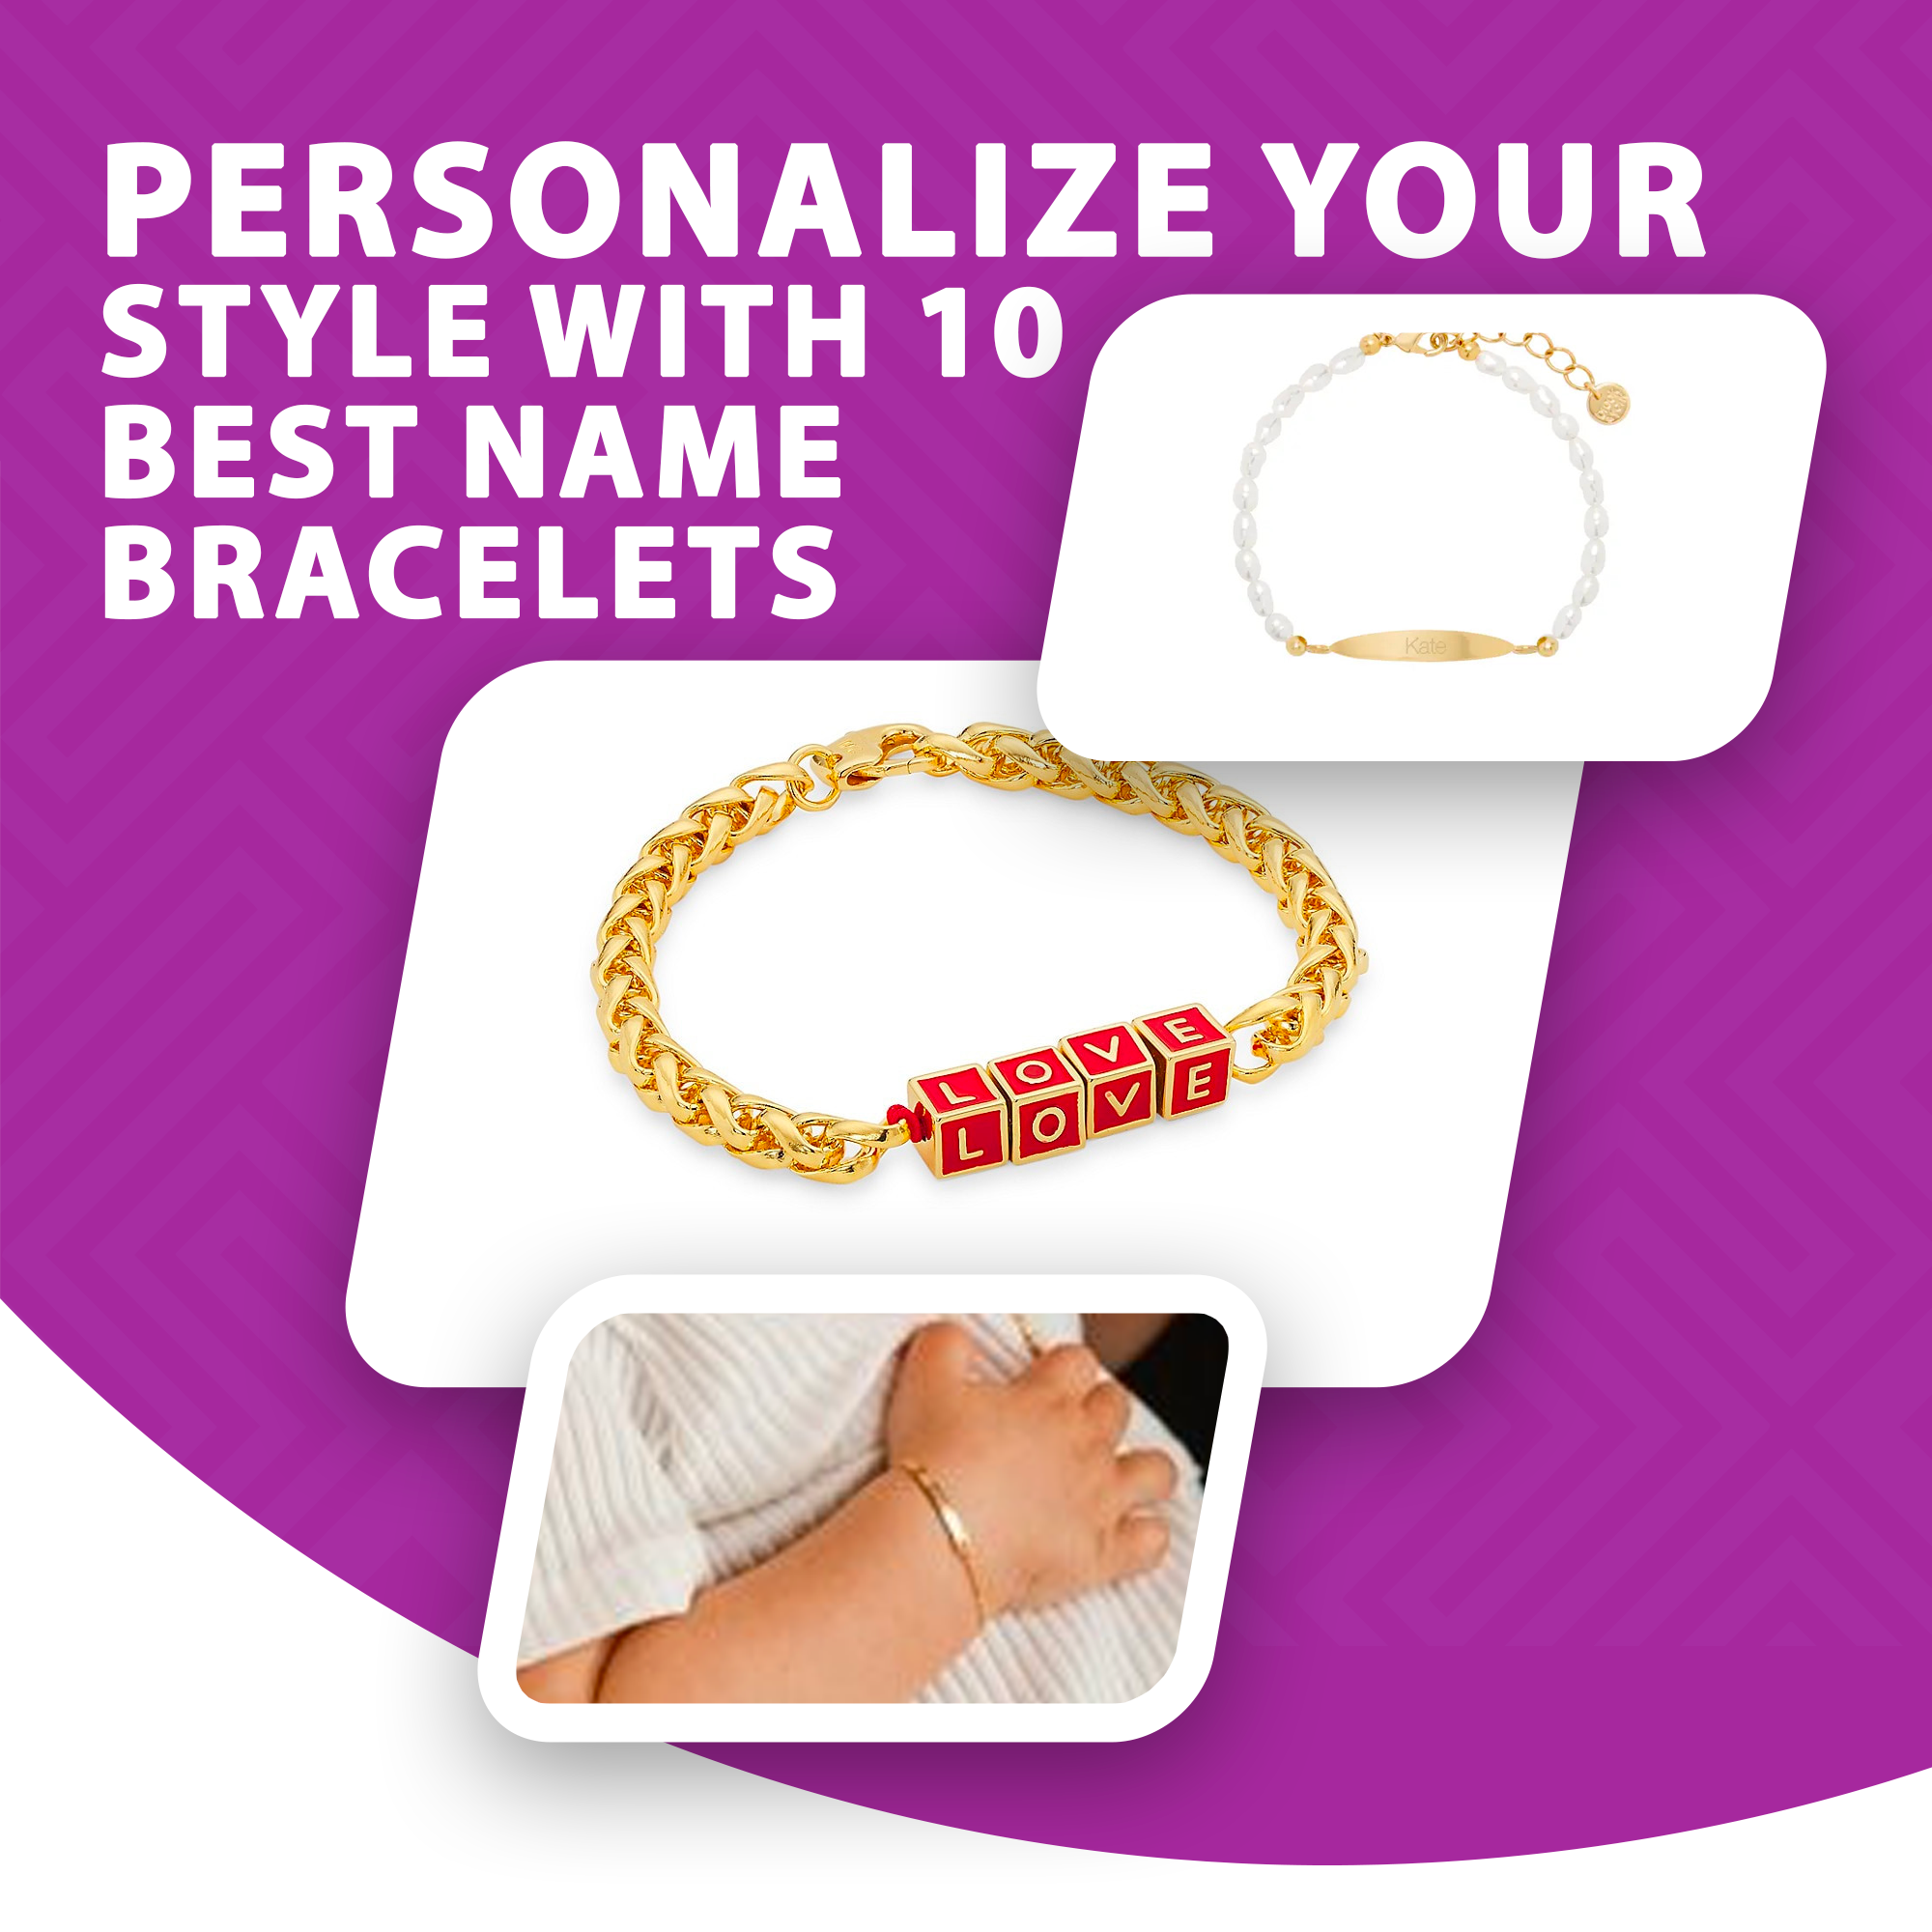 Personalize Your Style With 10 Best Name Bracelets